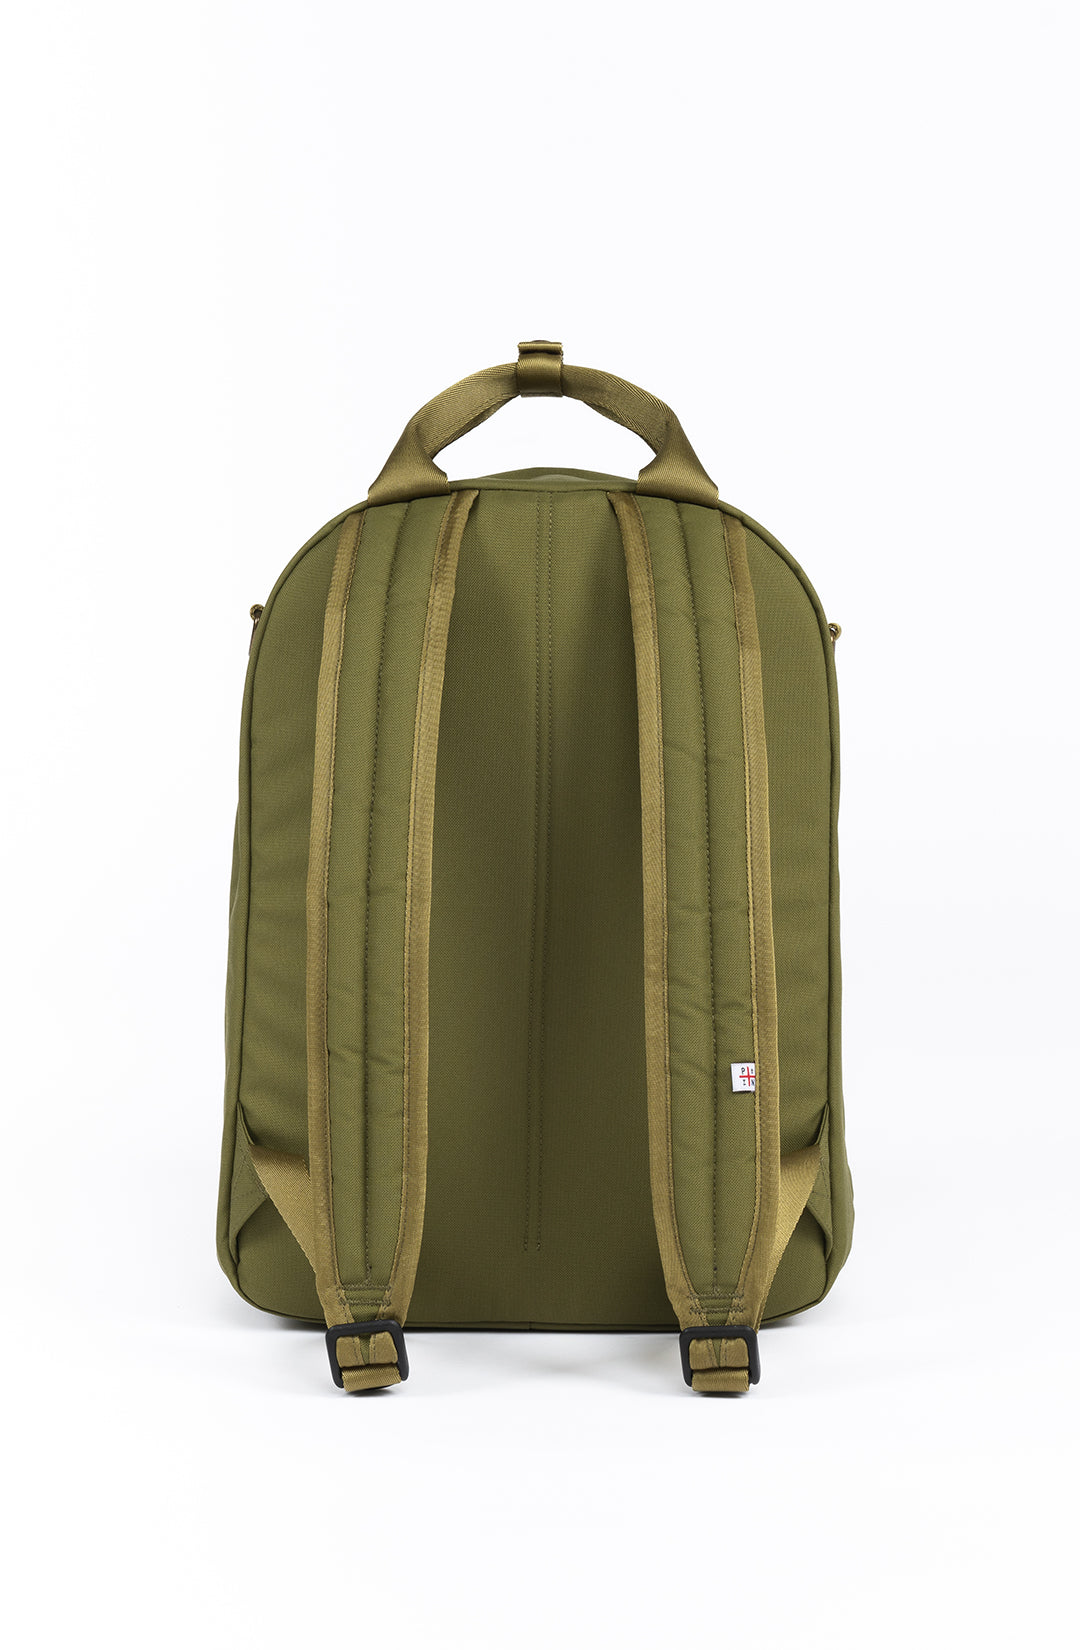 Kids Pacific Pack (Olive/Navy)